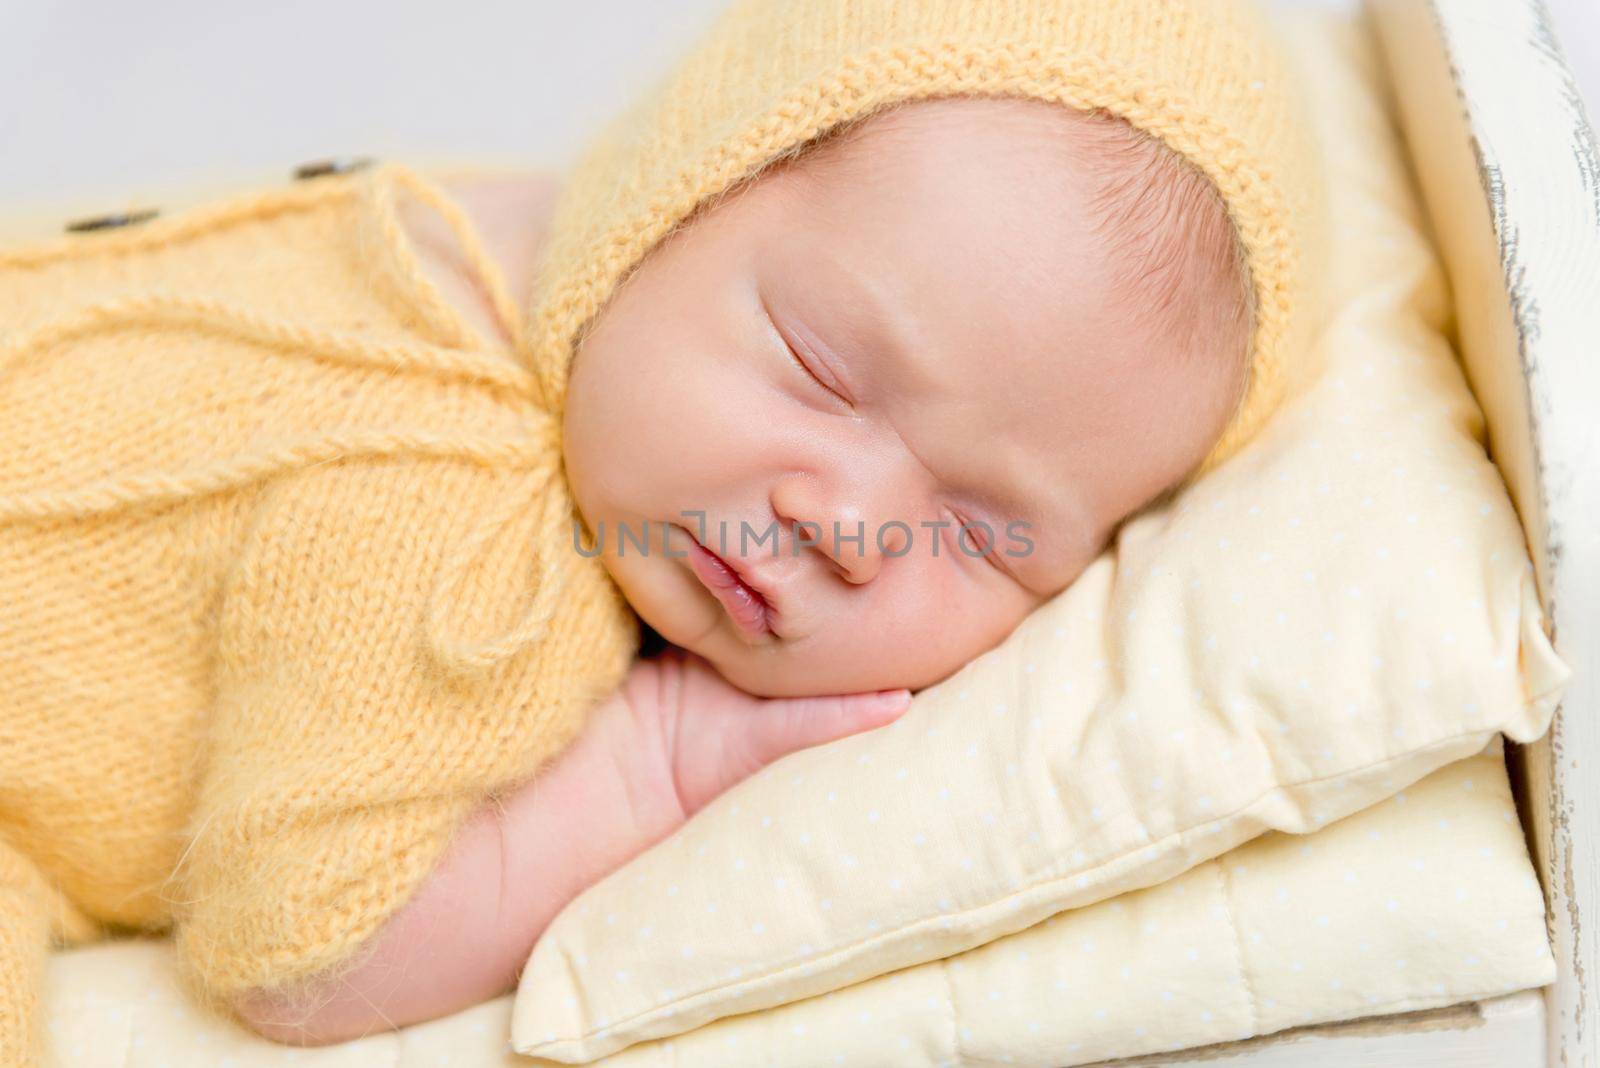 Baby dressed in knitted yellow costume sleeping on crib by tan4ikk1